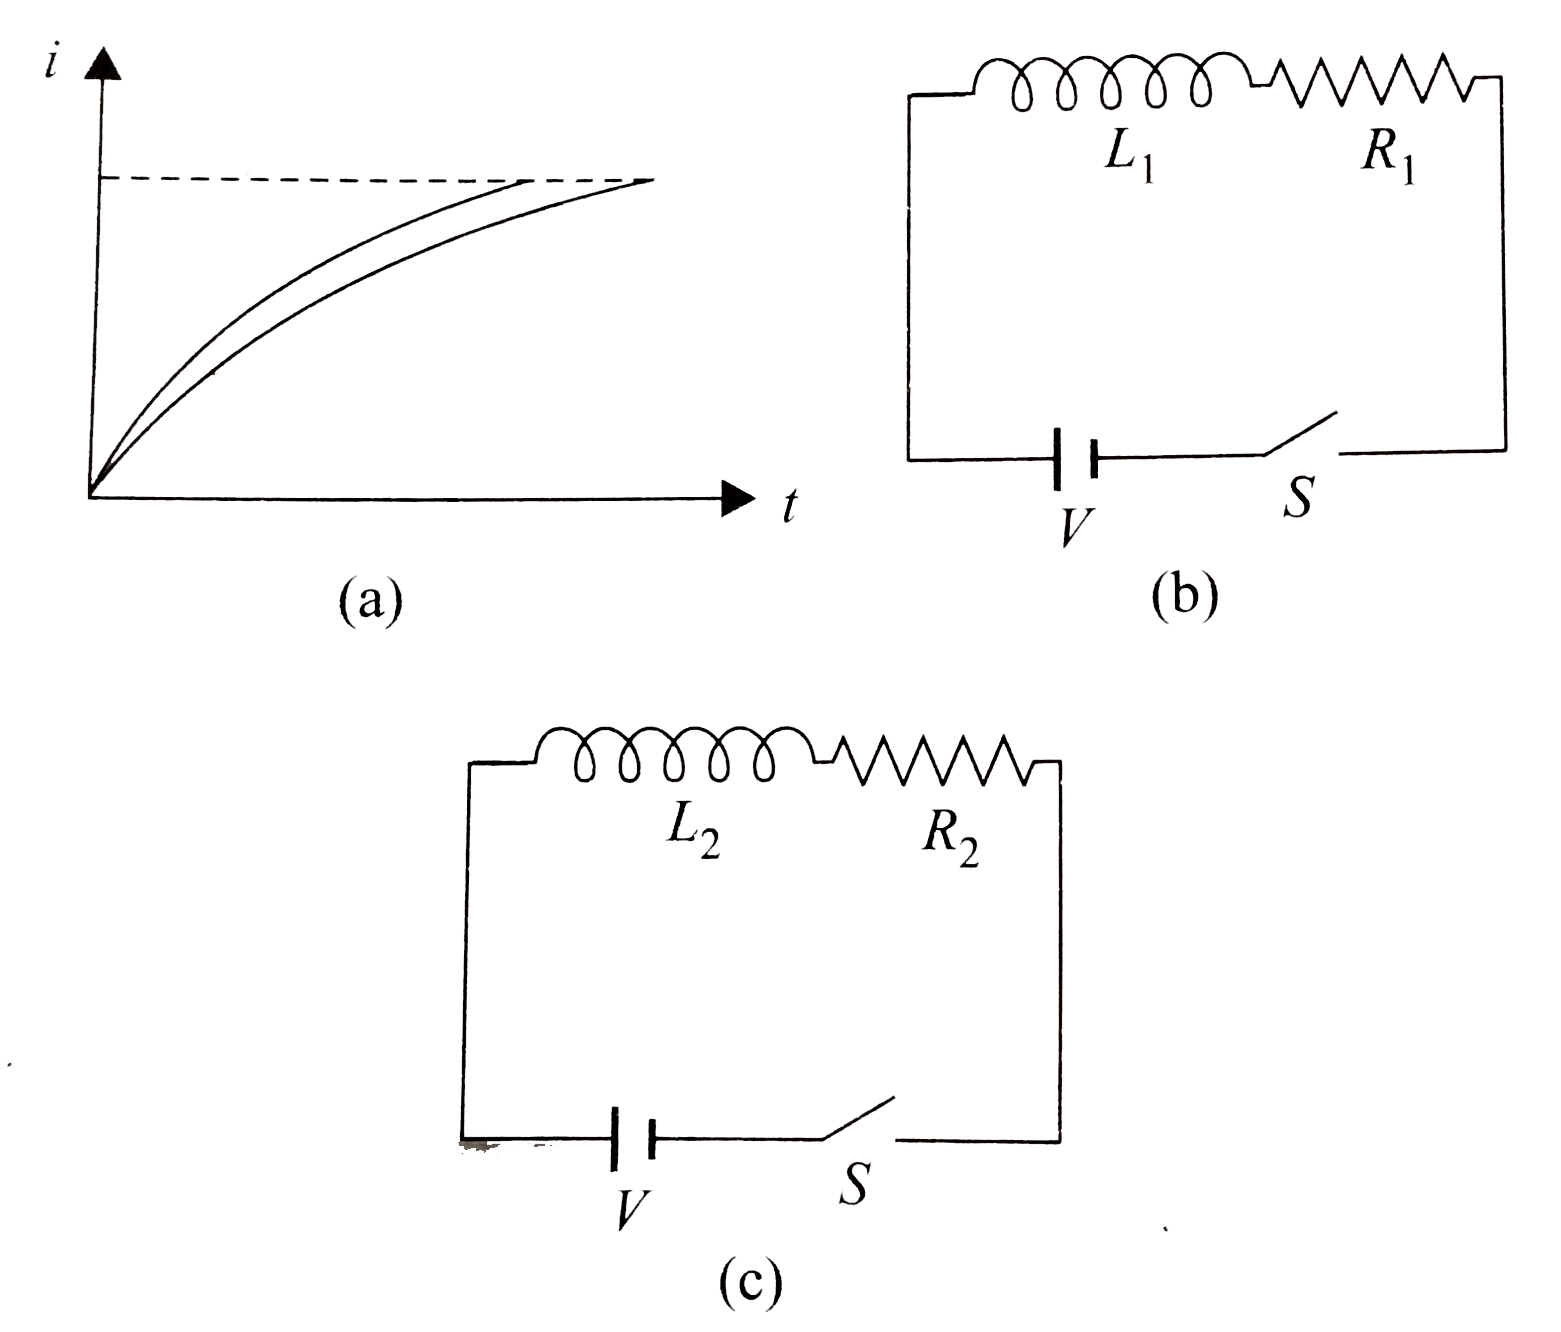 The current growth in two L-R circuits (b) and (c) is as shown in Fig. Let L(1), L(2), R(1) and R(2) be the corresponding values in two circuits. Then